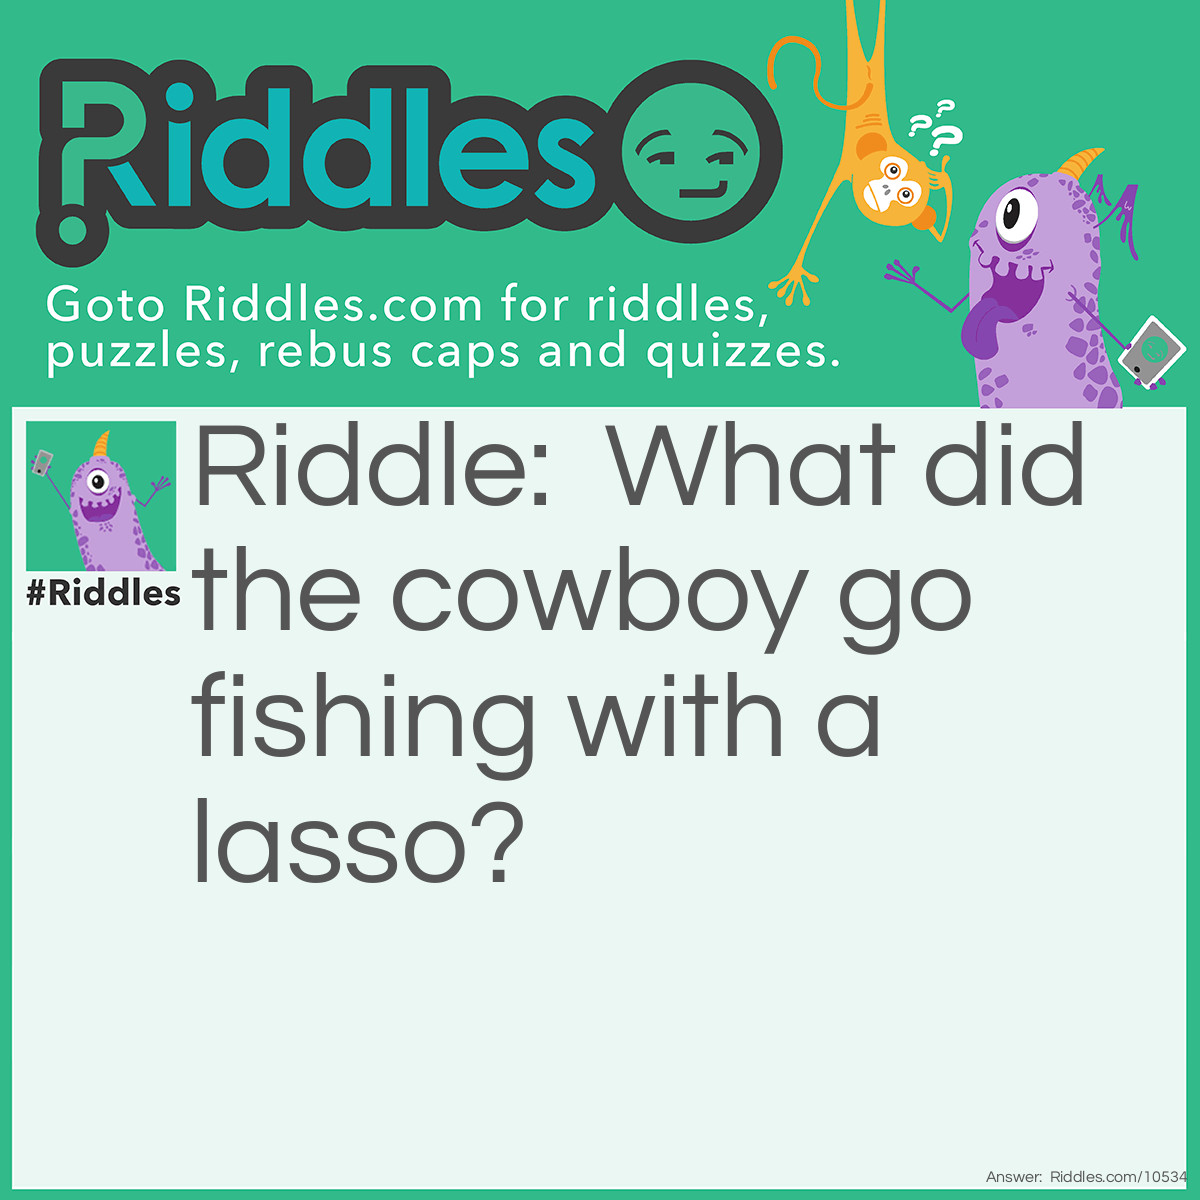 Riddle: What did the cowboy go fishing with a lasso? Answer: To catch a Bull Shark or maybe some Sea Horses.